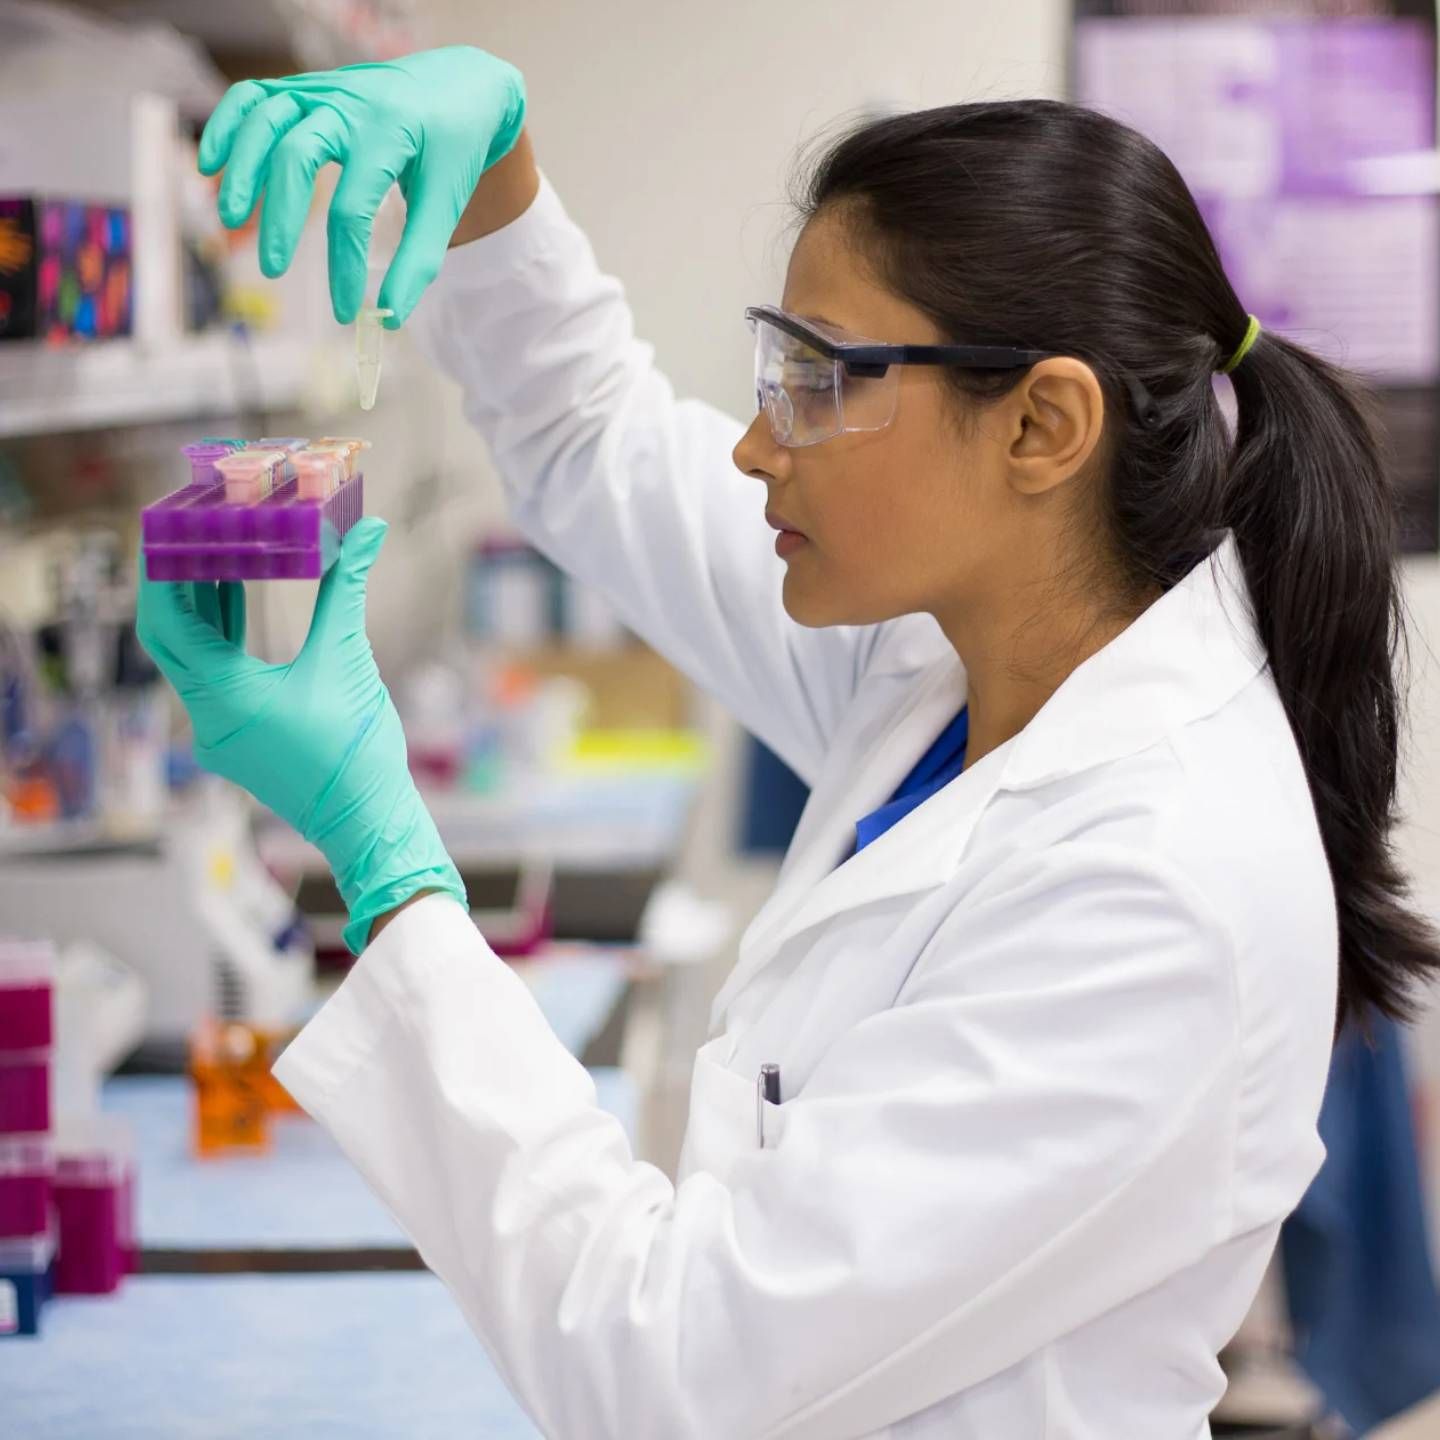 A woman in a lab coat and green gloves is holding a purple object.